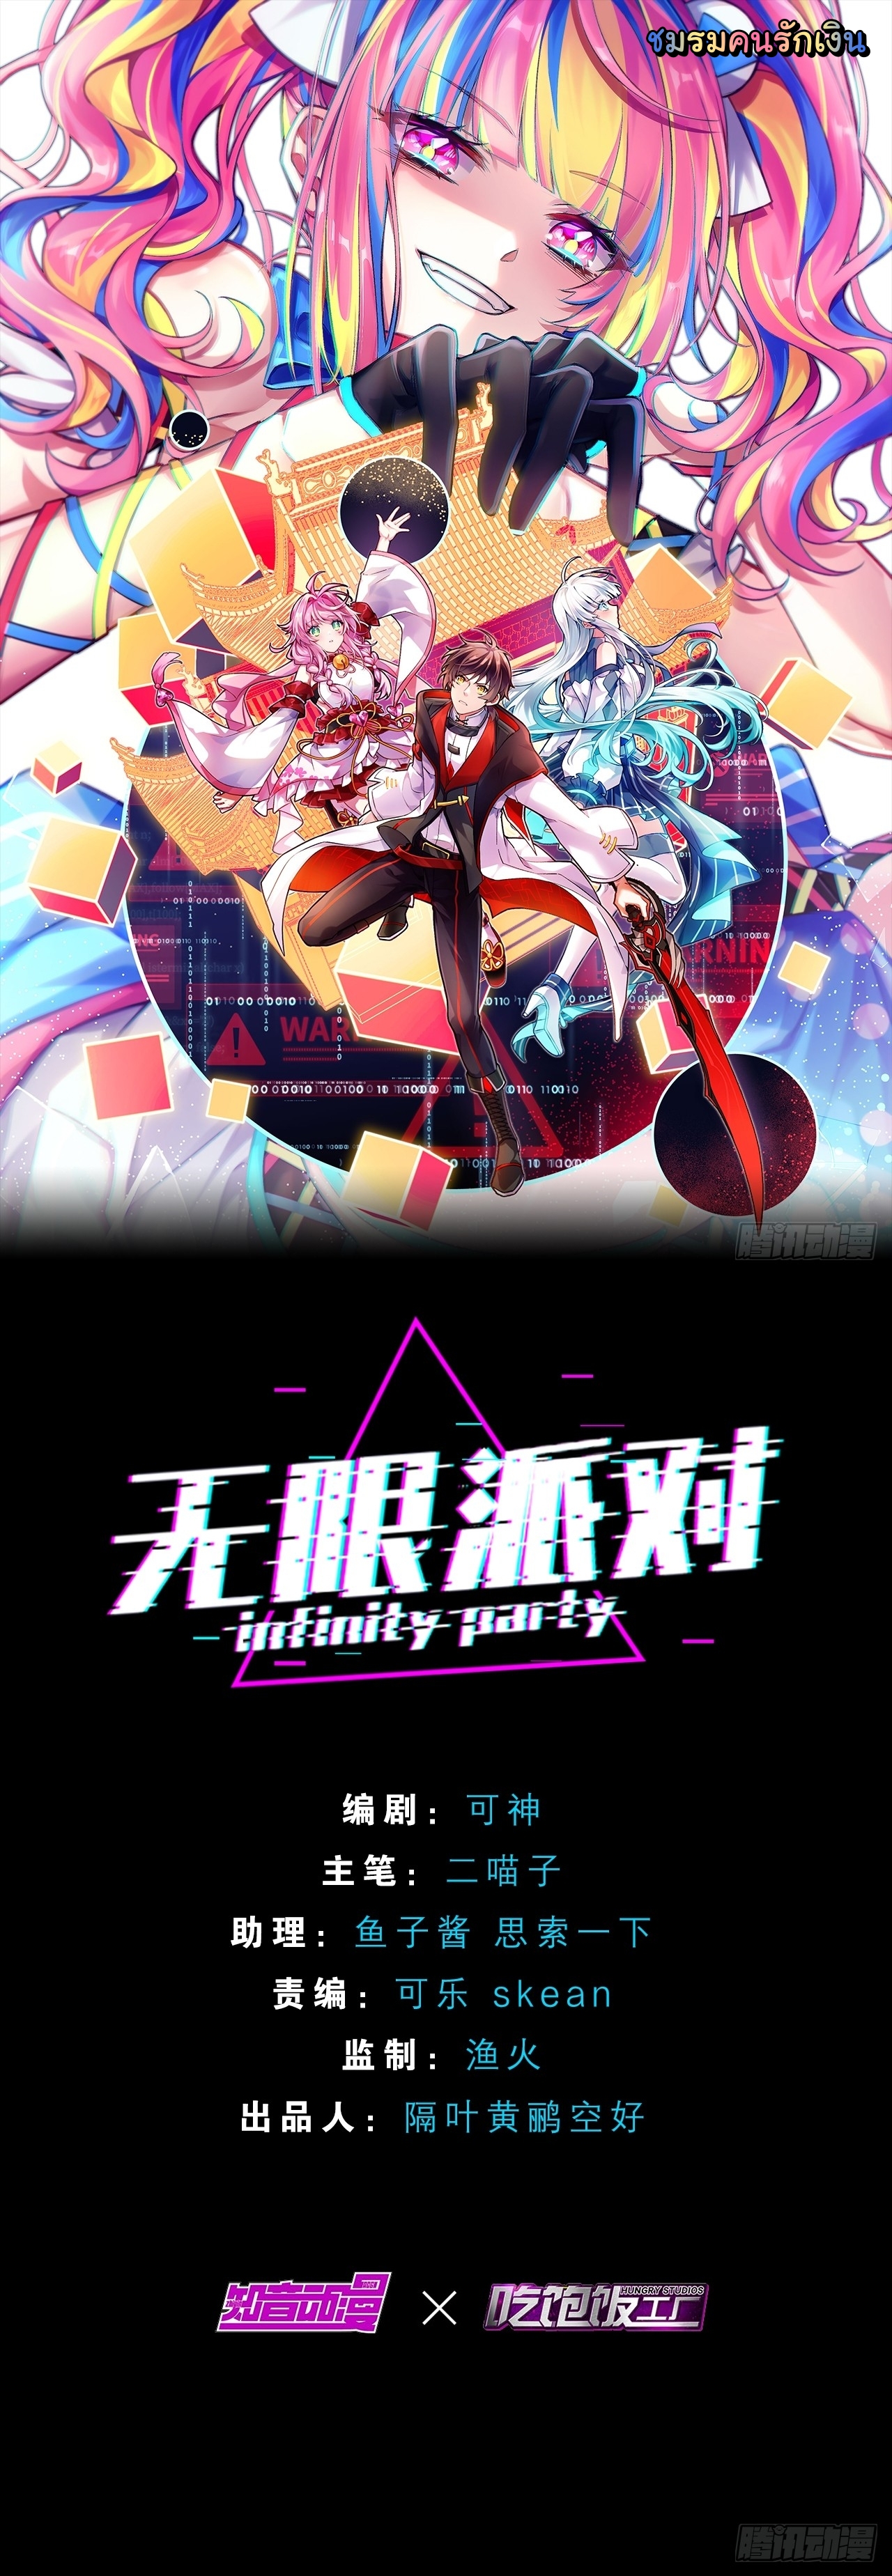 Infinity party 5 (1)